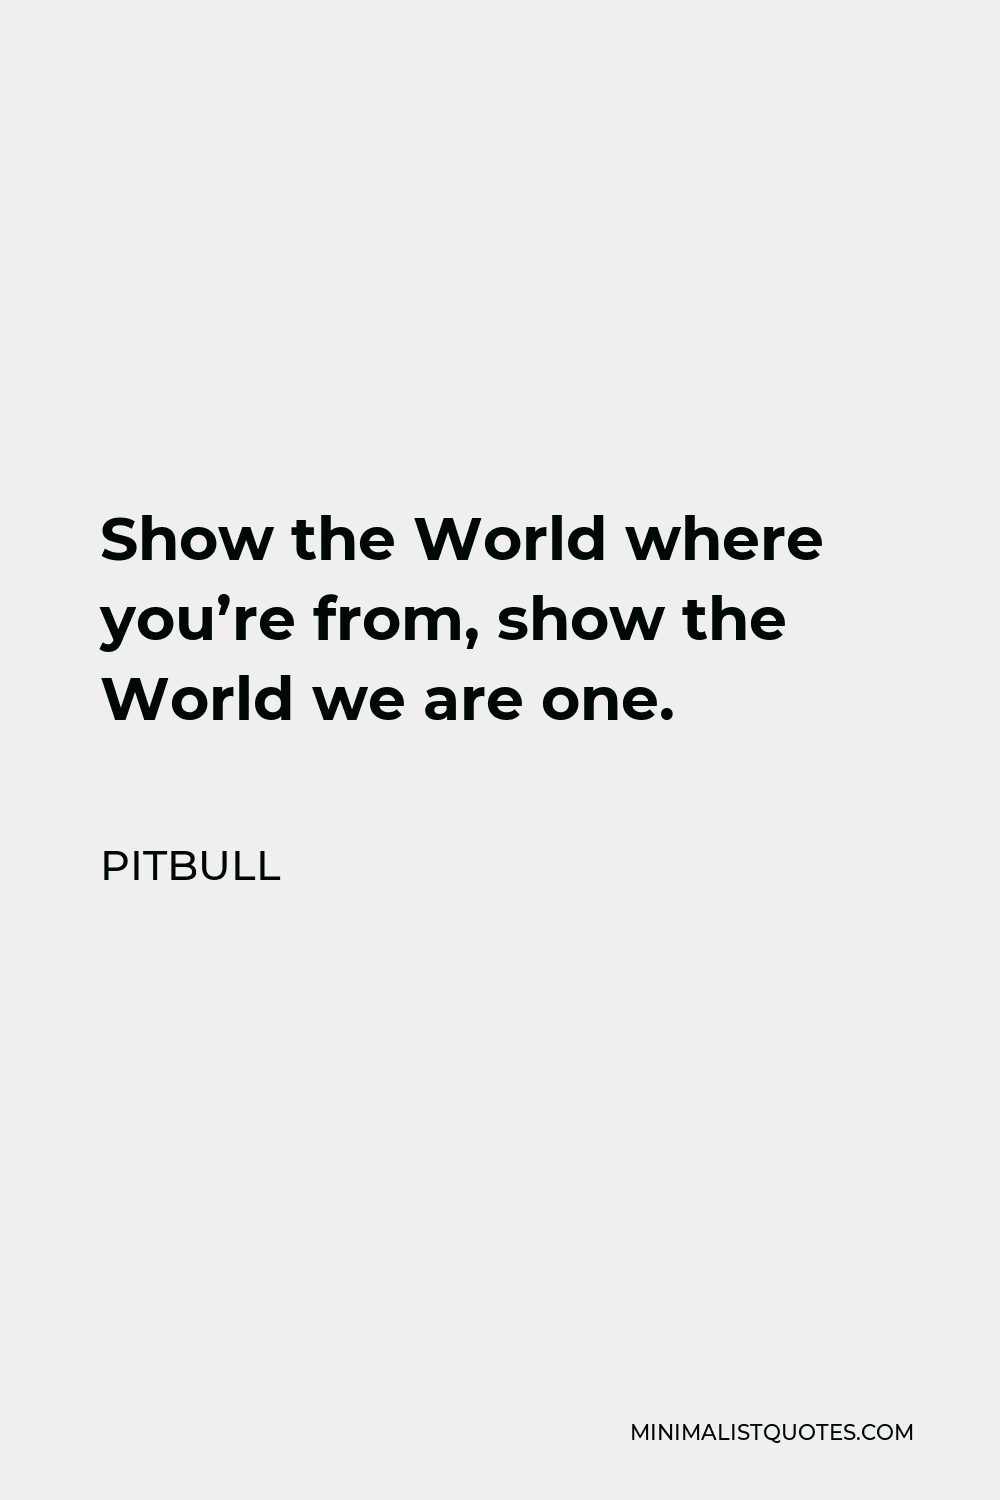 Pitbull Quote - Show the World where you’re from, show the World we are one.